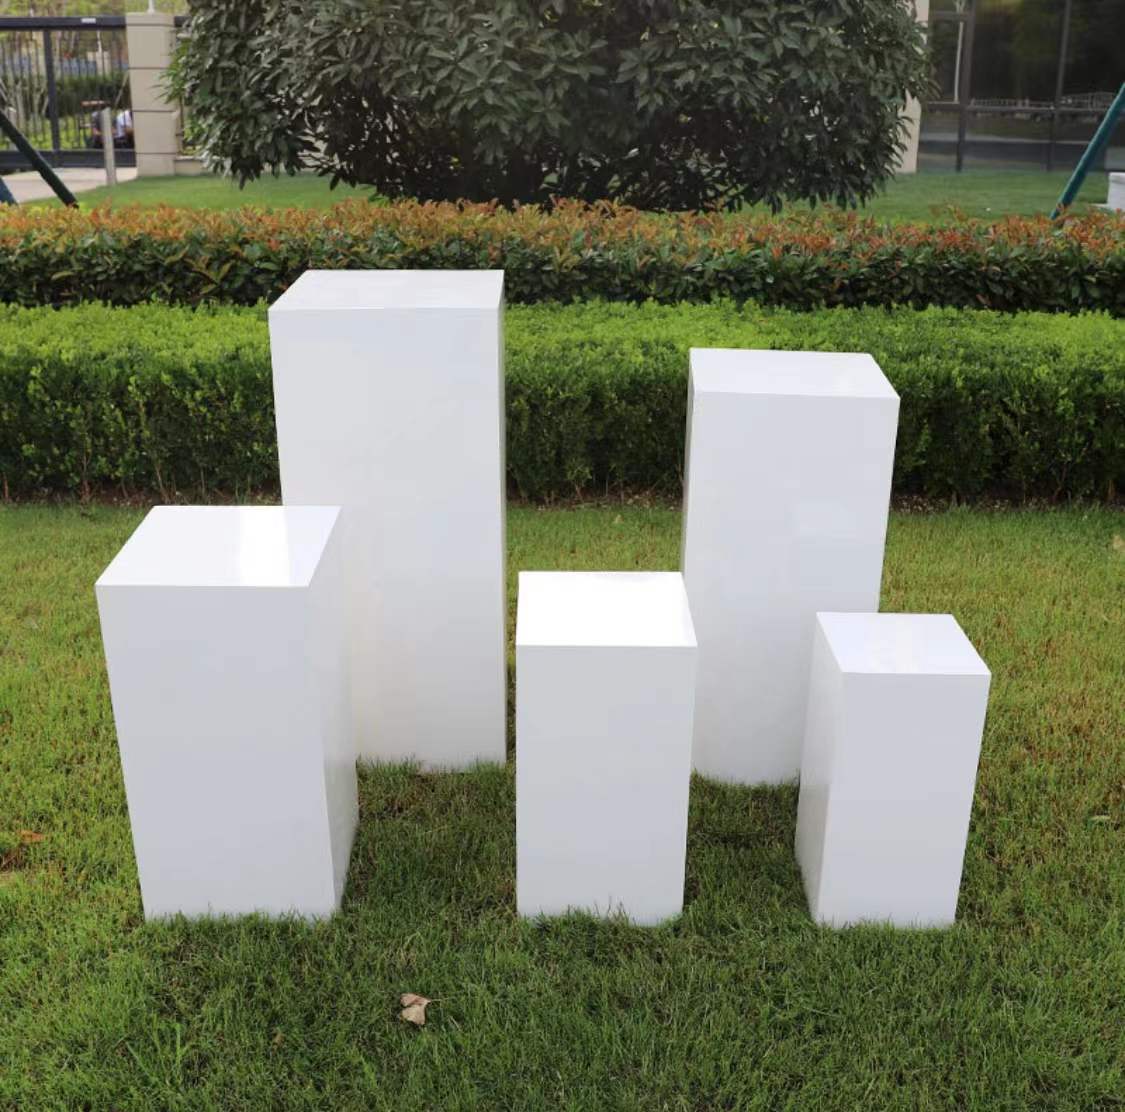 White metal square stands used for floral arrangements in an outdoor setting.